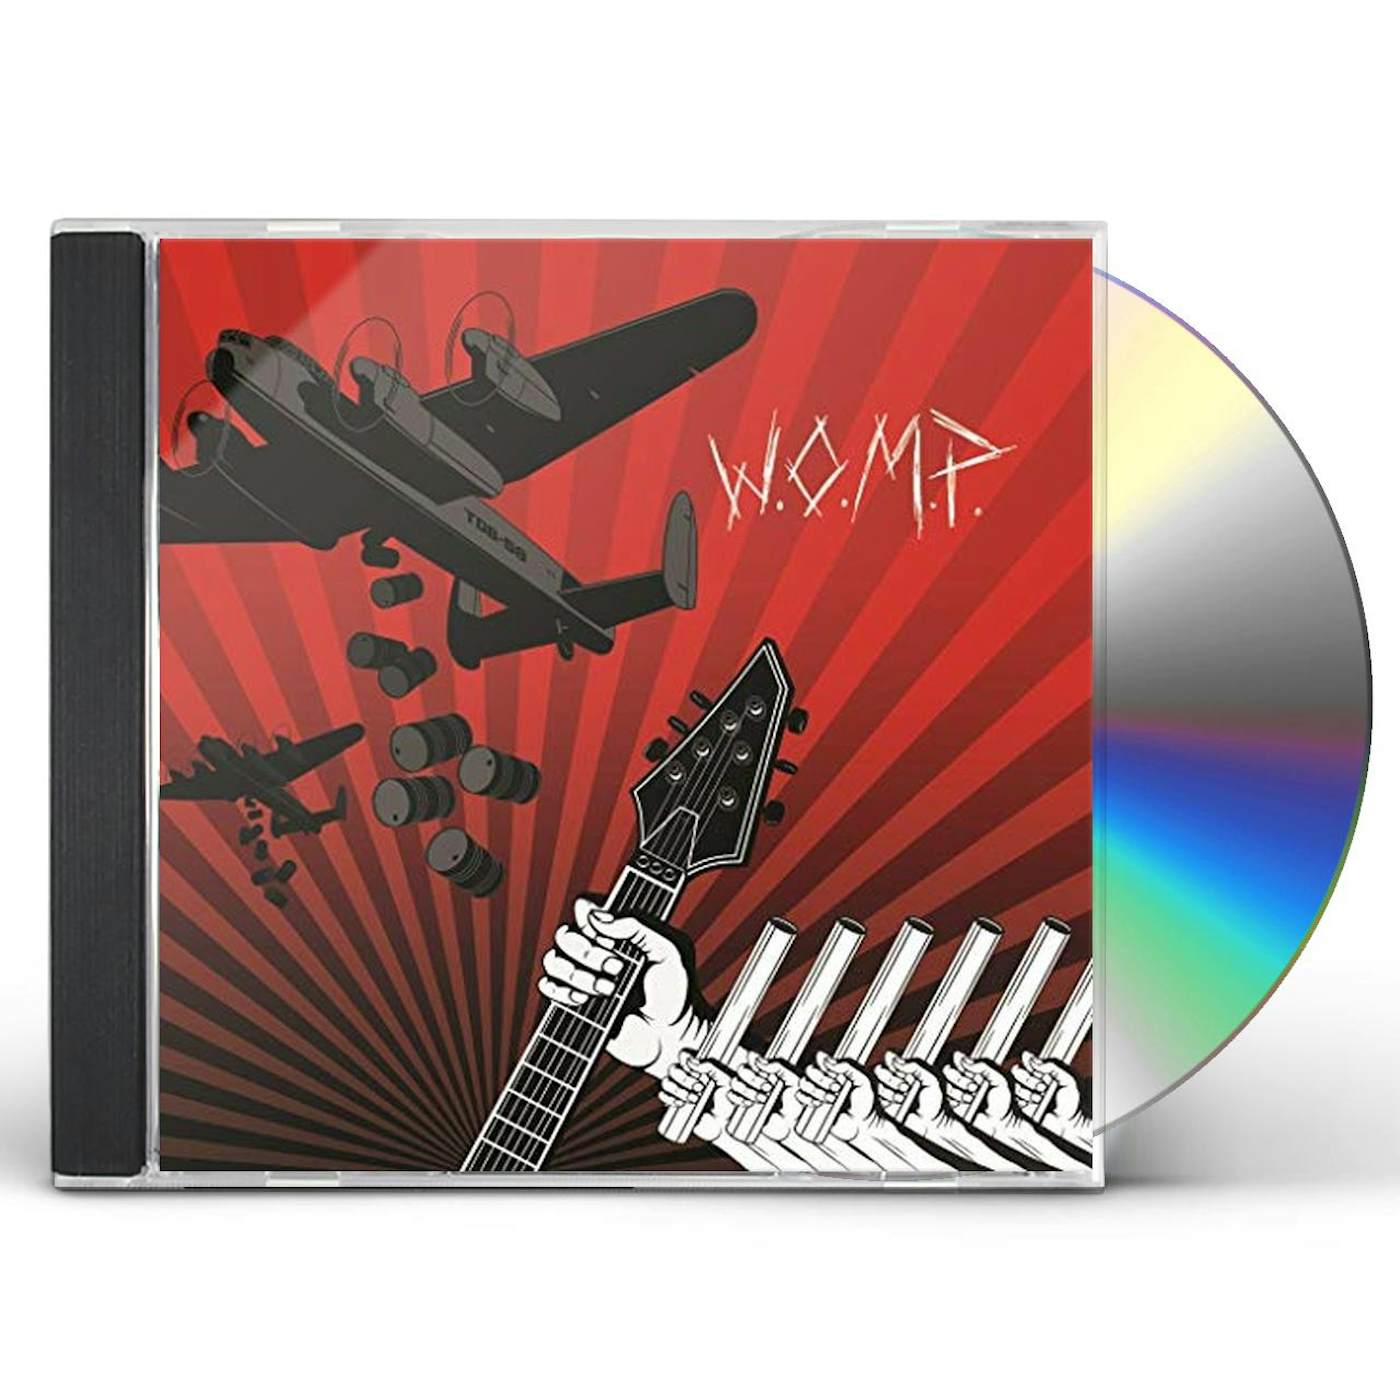 Les Tambours du Bronx WEAPONS OF MASS PERCUSSION CD